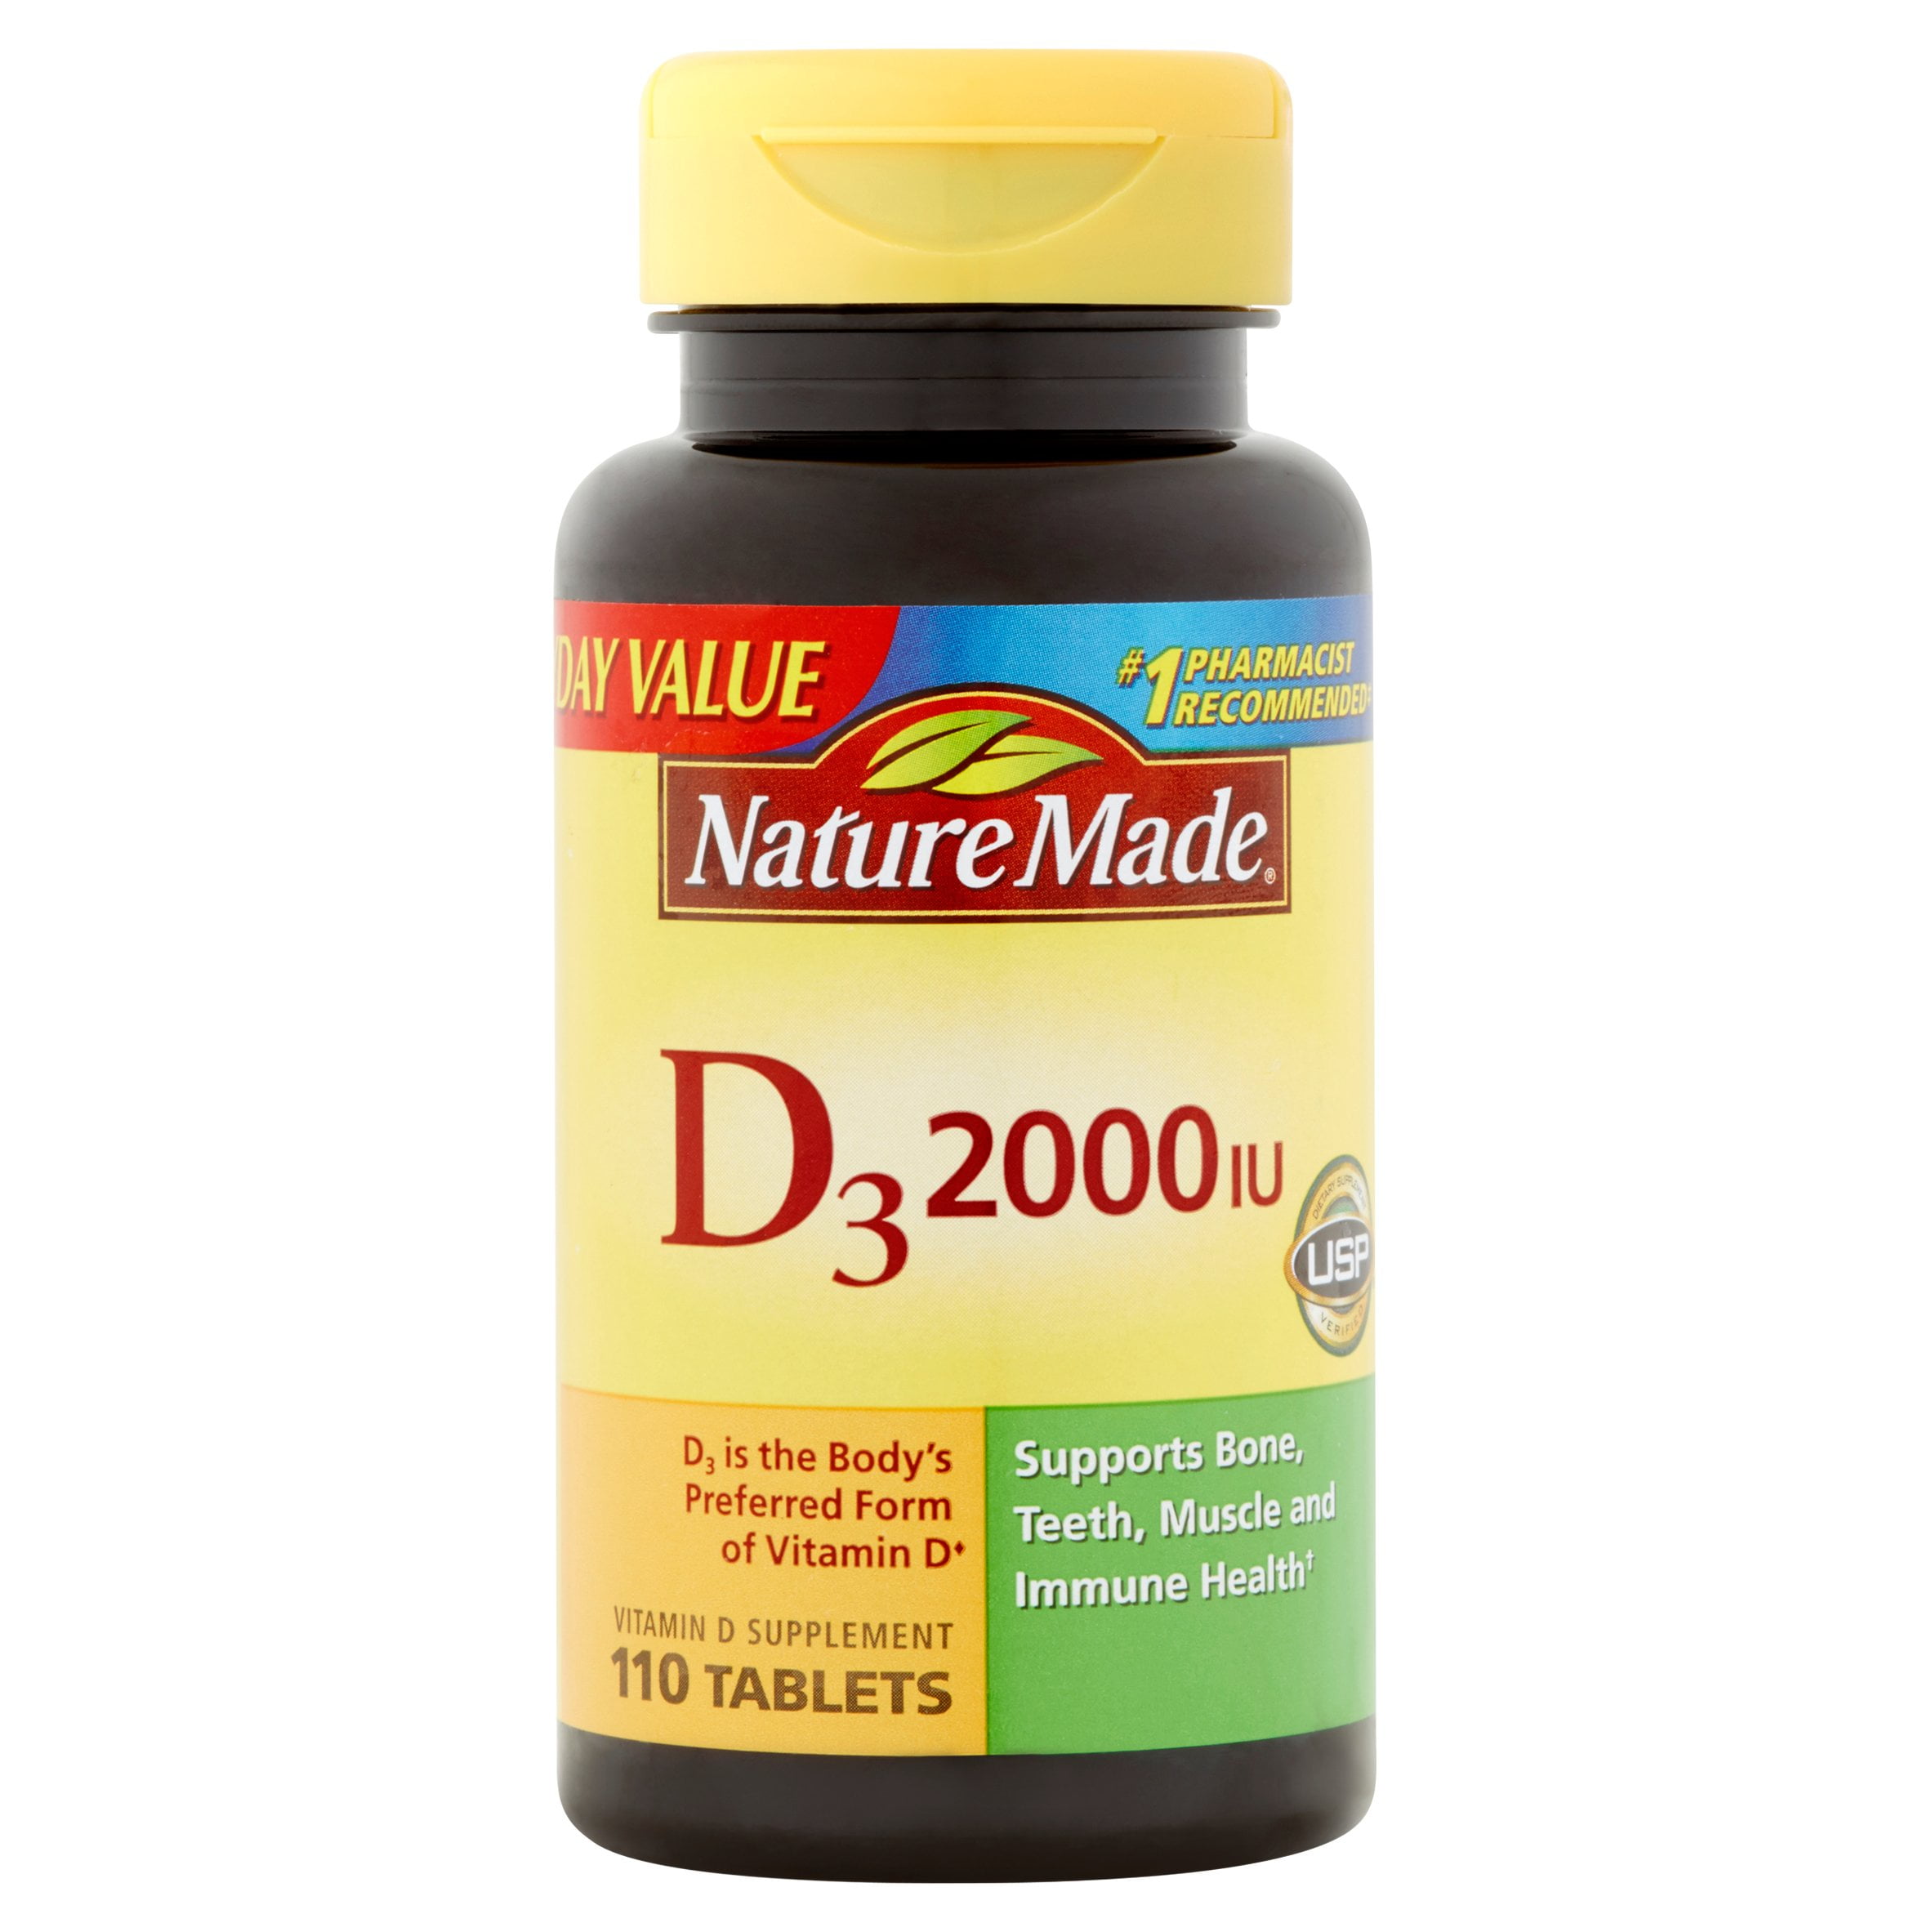 Nature Made Vitamin D3 Dietary Supplement Tablets, 2000 I.U., 110 ct